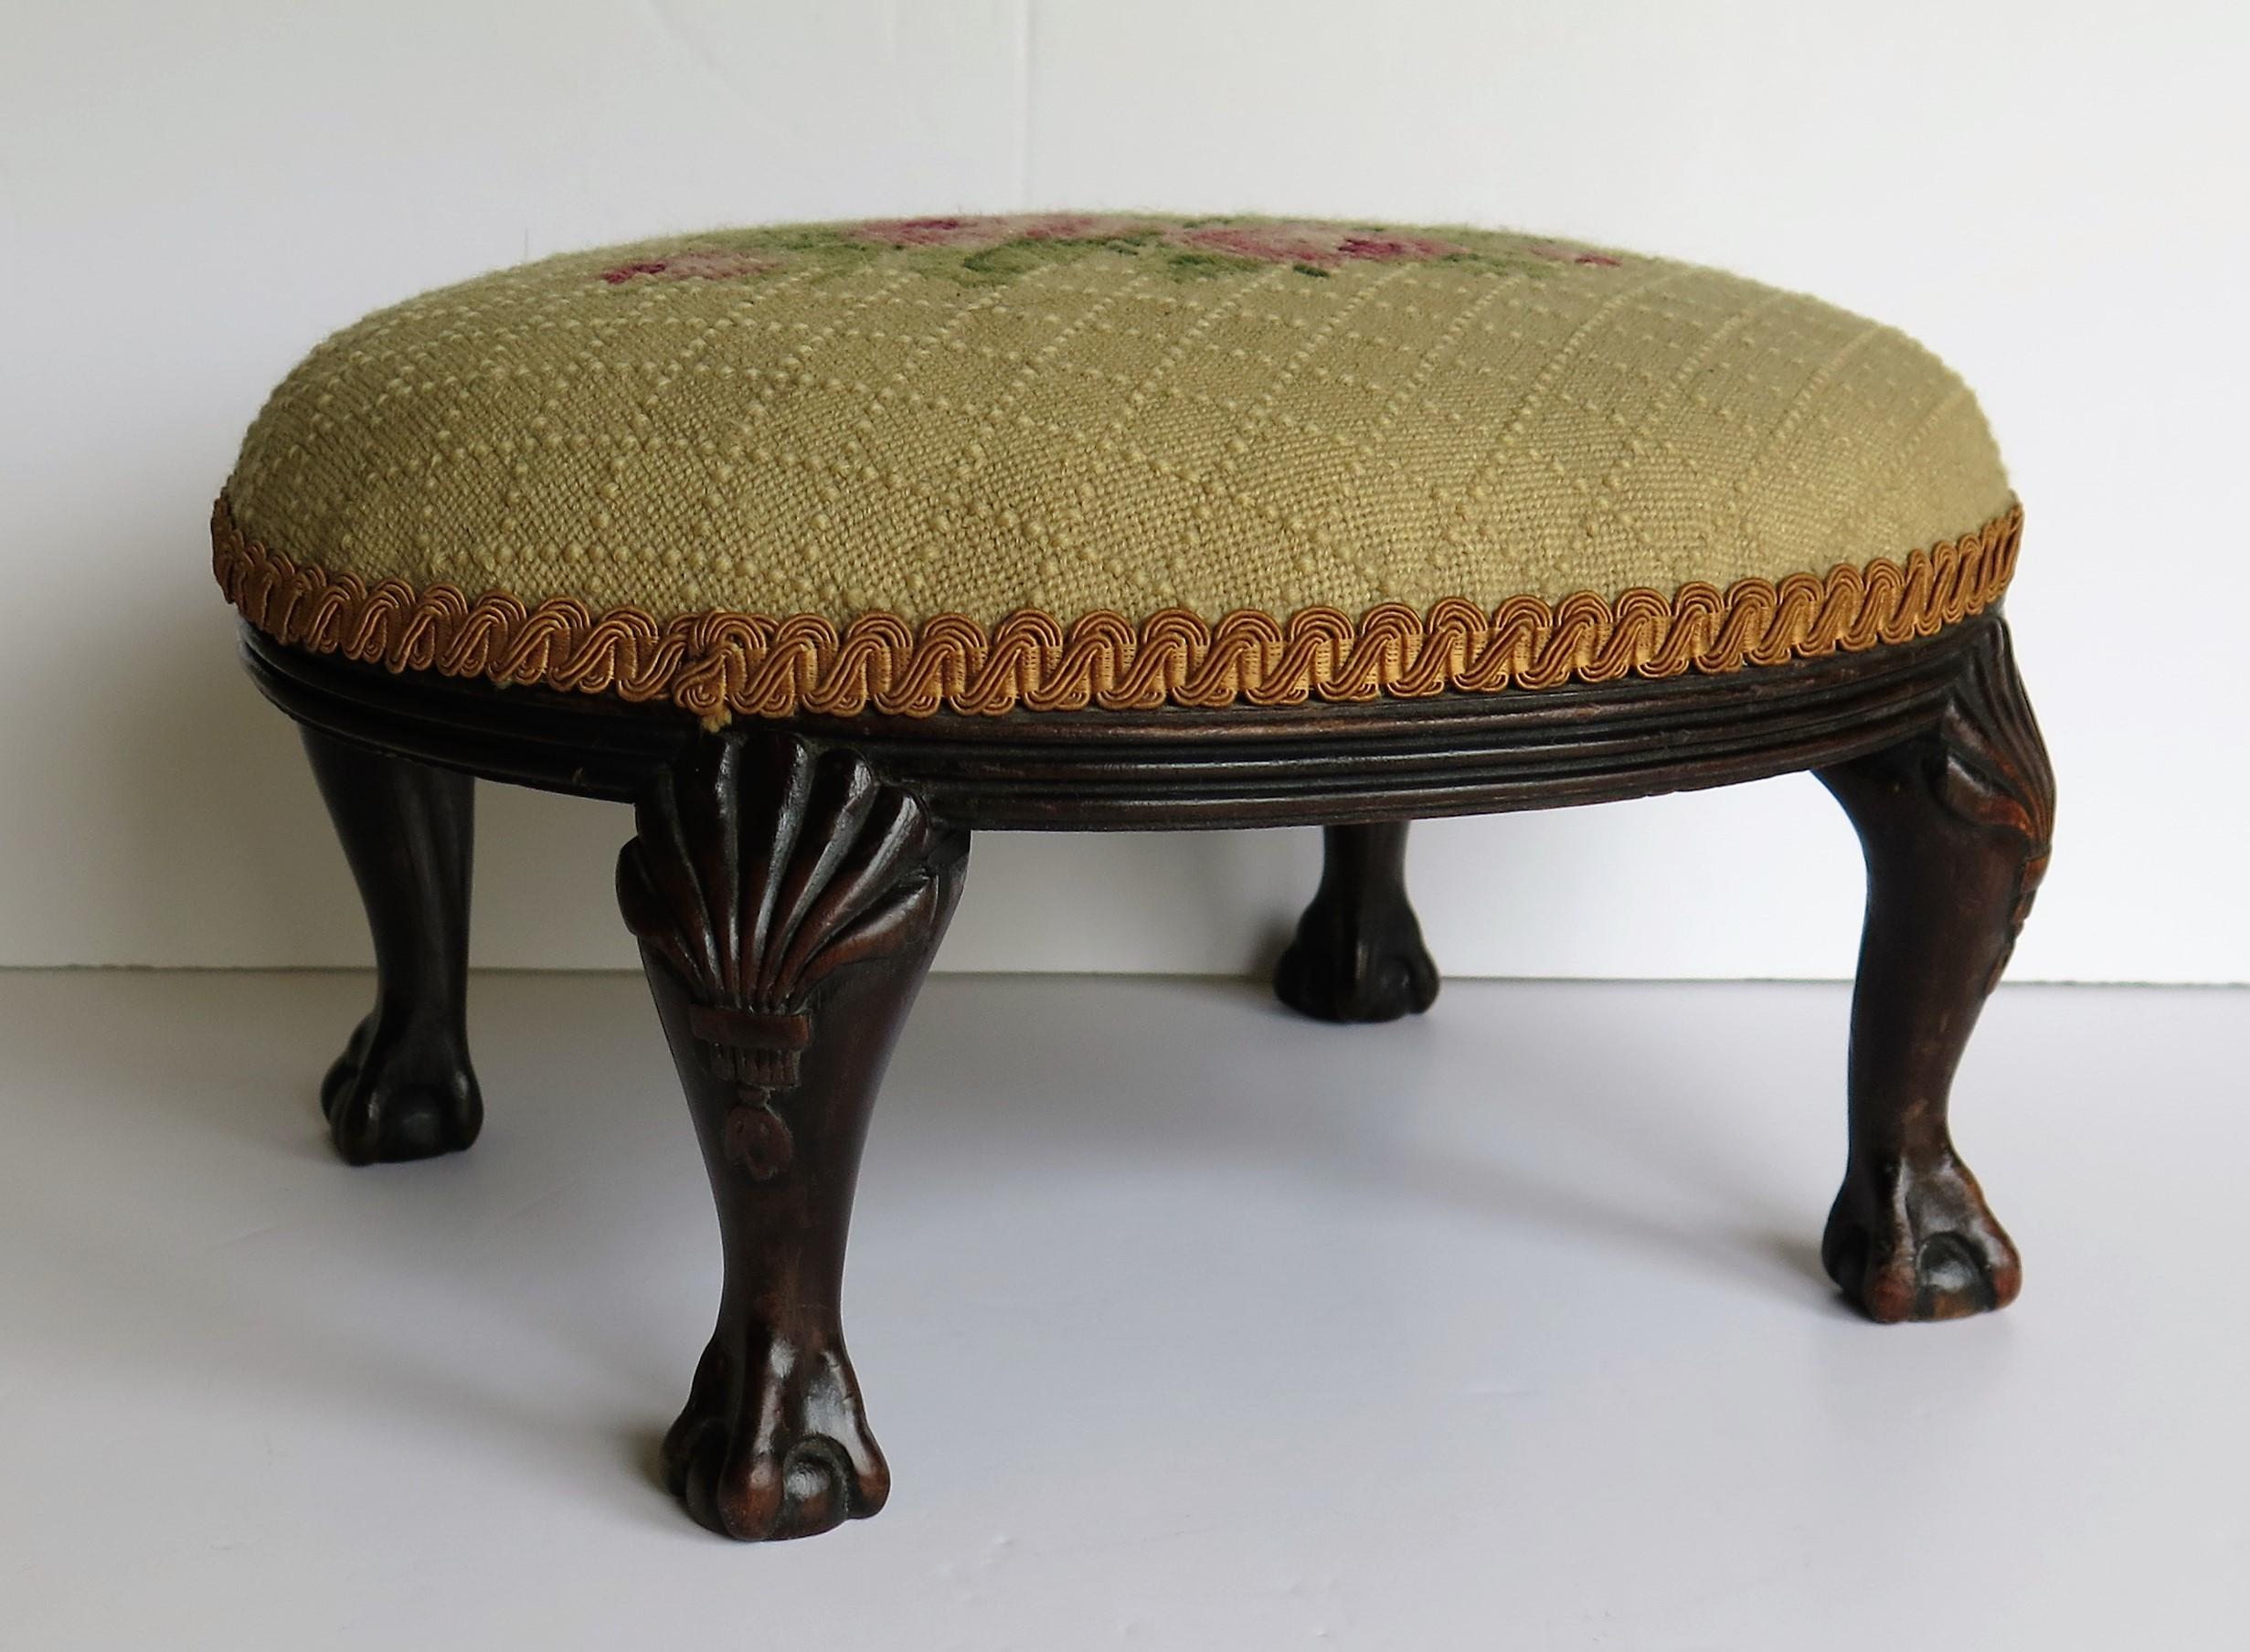 Fabric Late Georgian Footstool Carved Shell Ball and Claw Legs Needlework Top, Ca. 1820